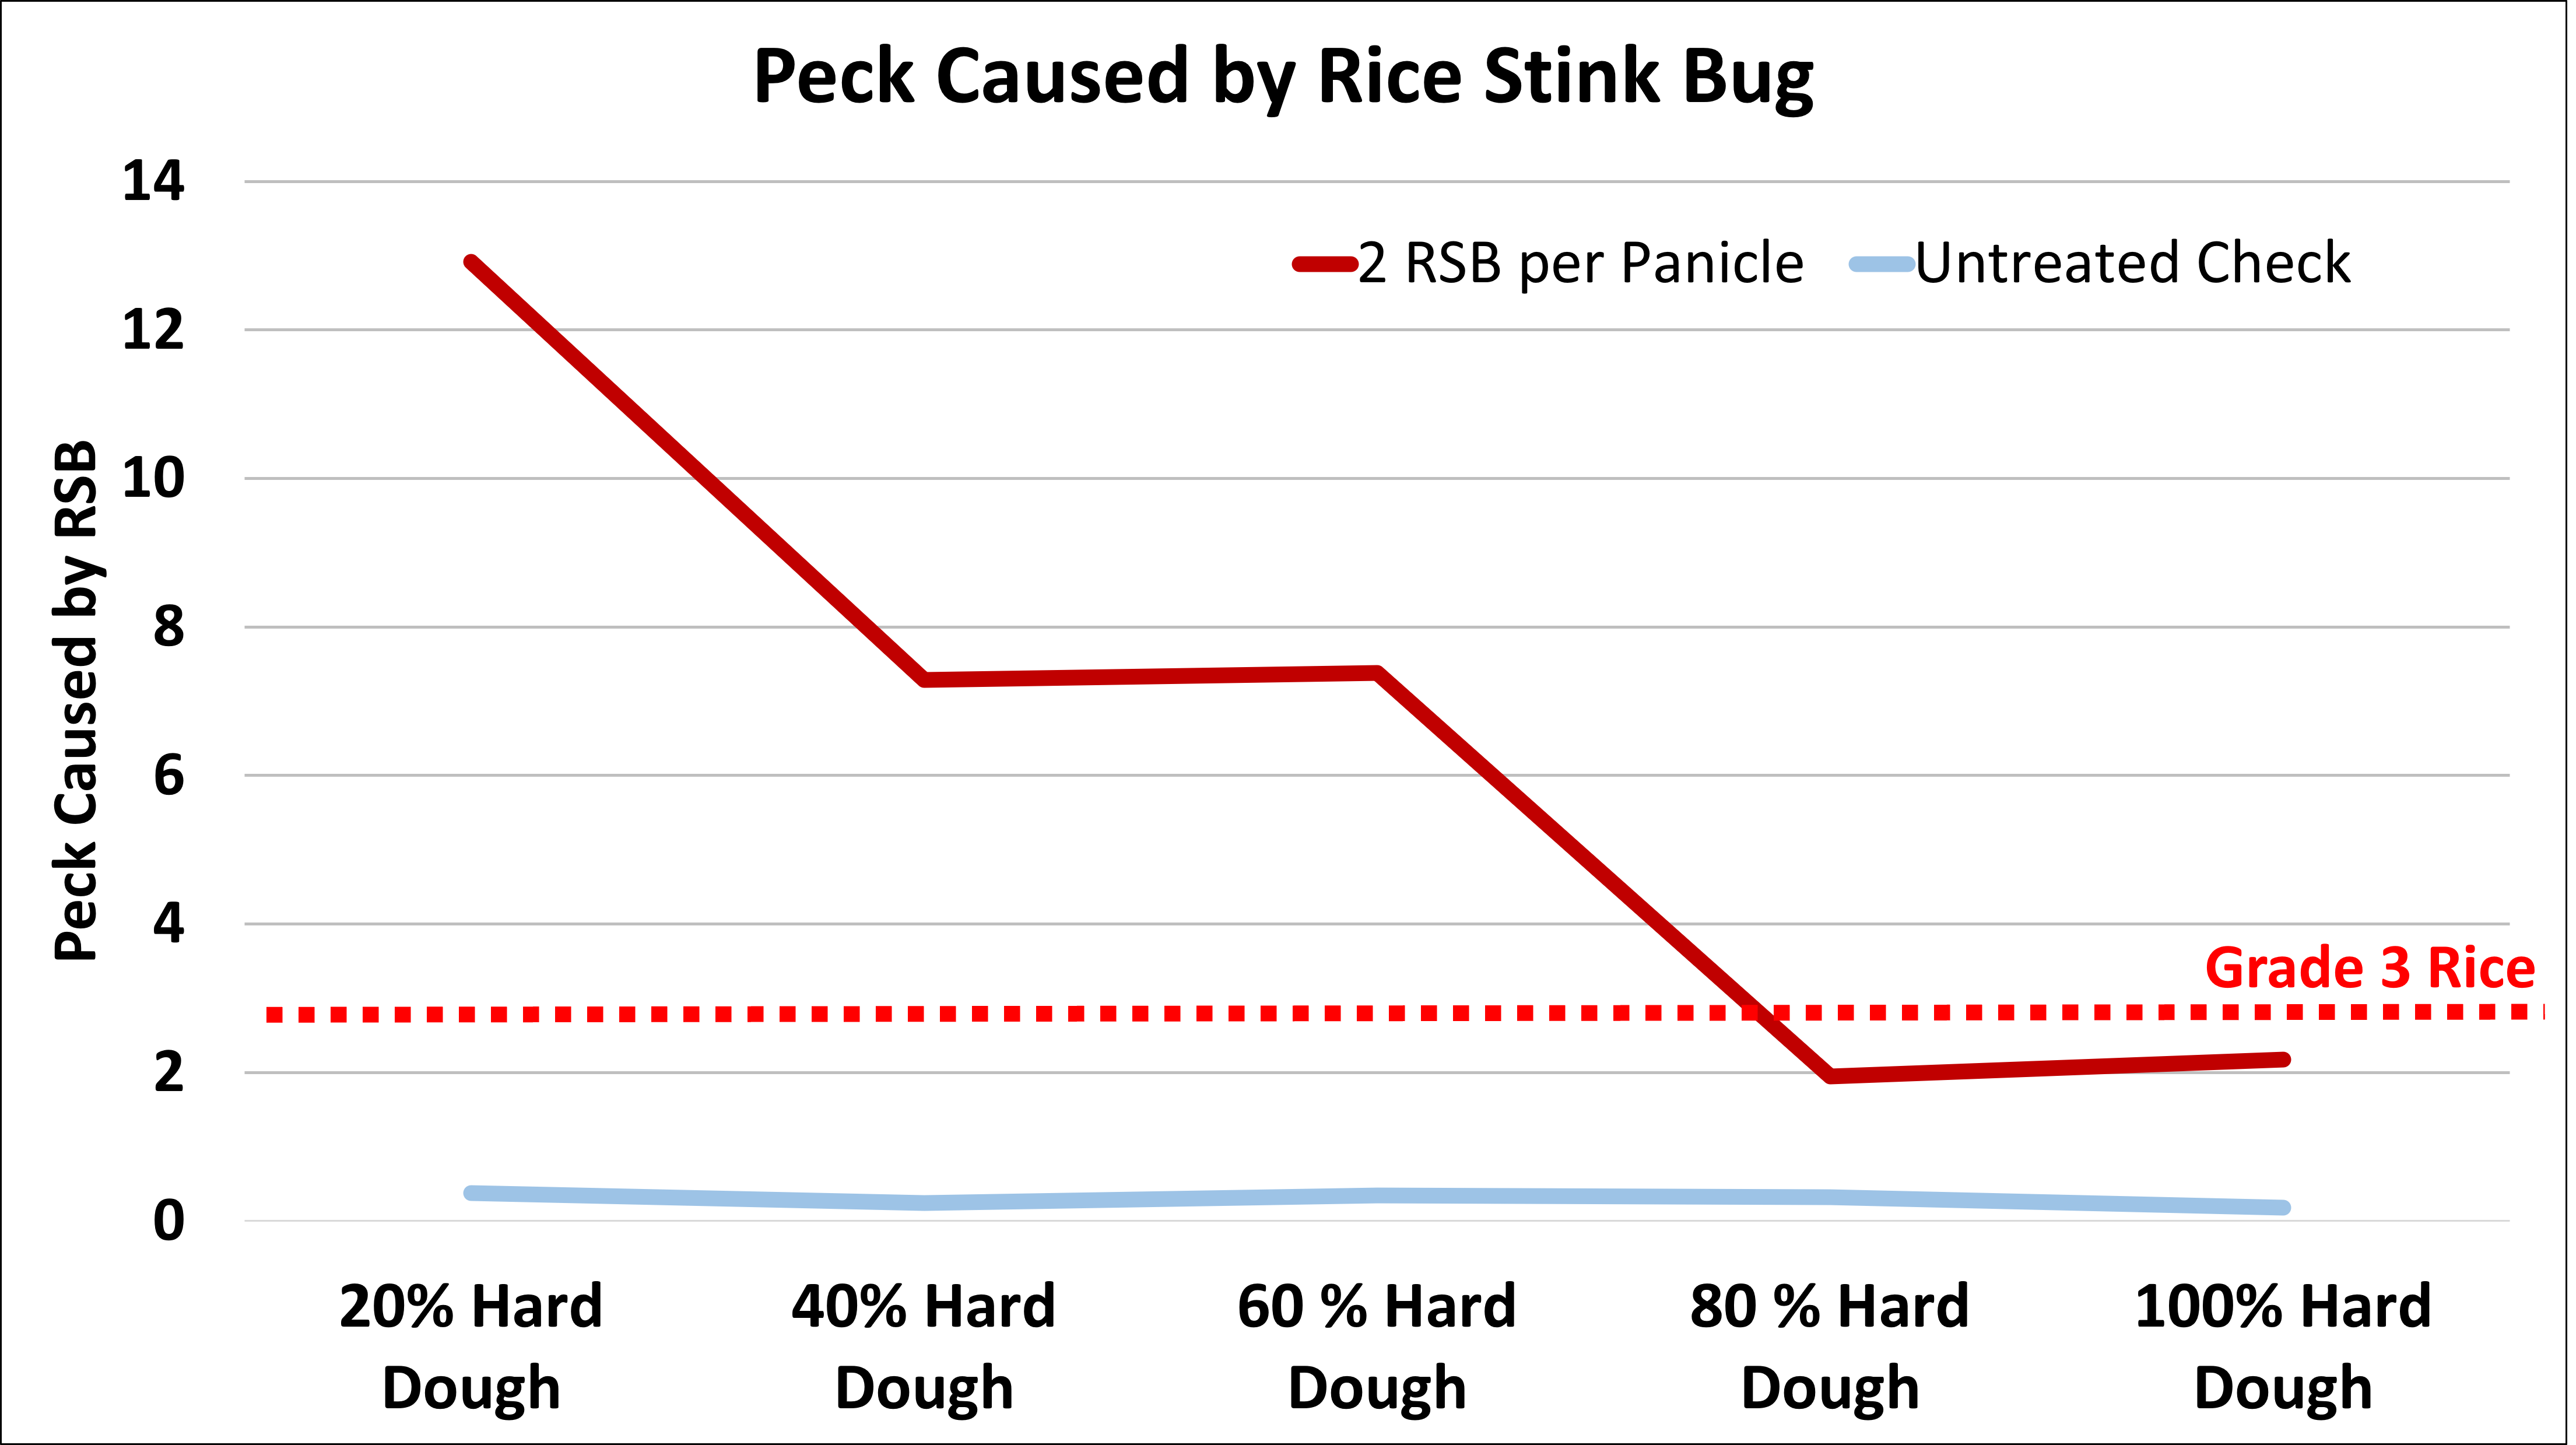 Damage (peck) caused by rice stink bug